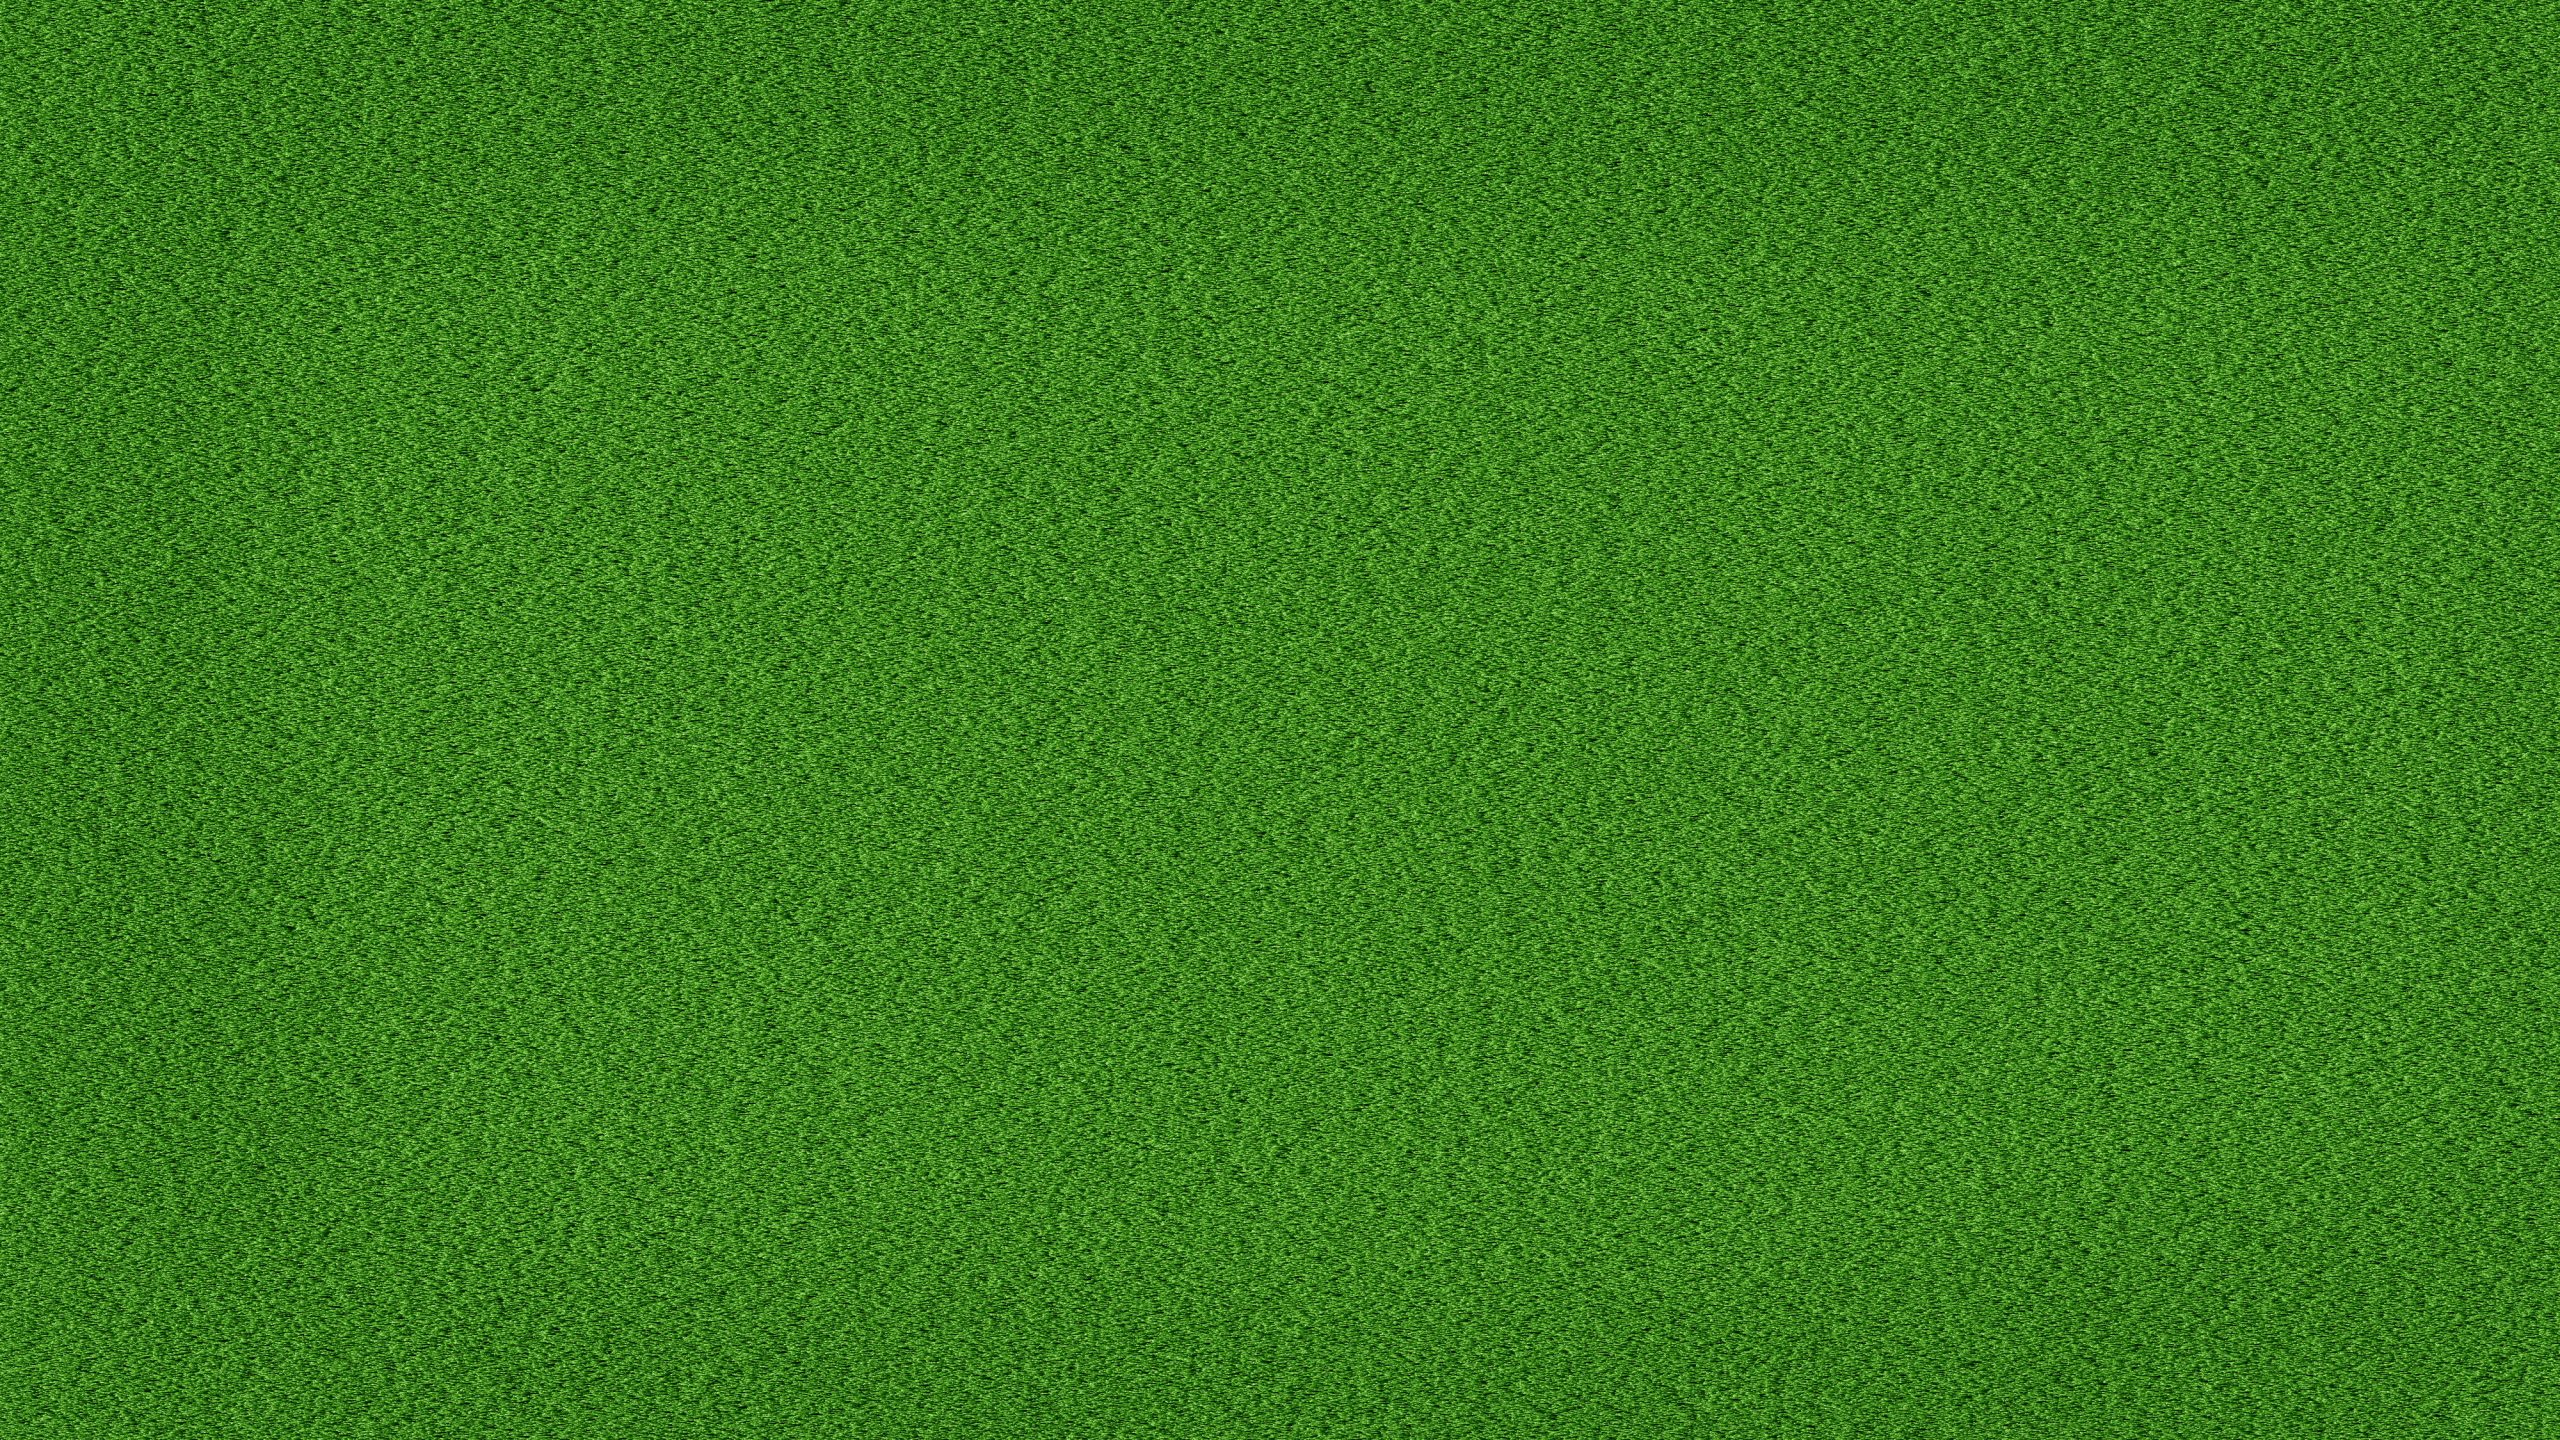 Green grass background wallpaper - Free Image by Inderpreet kaur on  